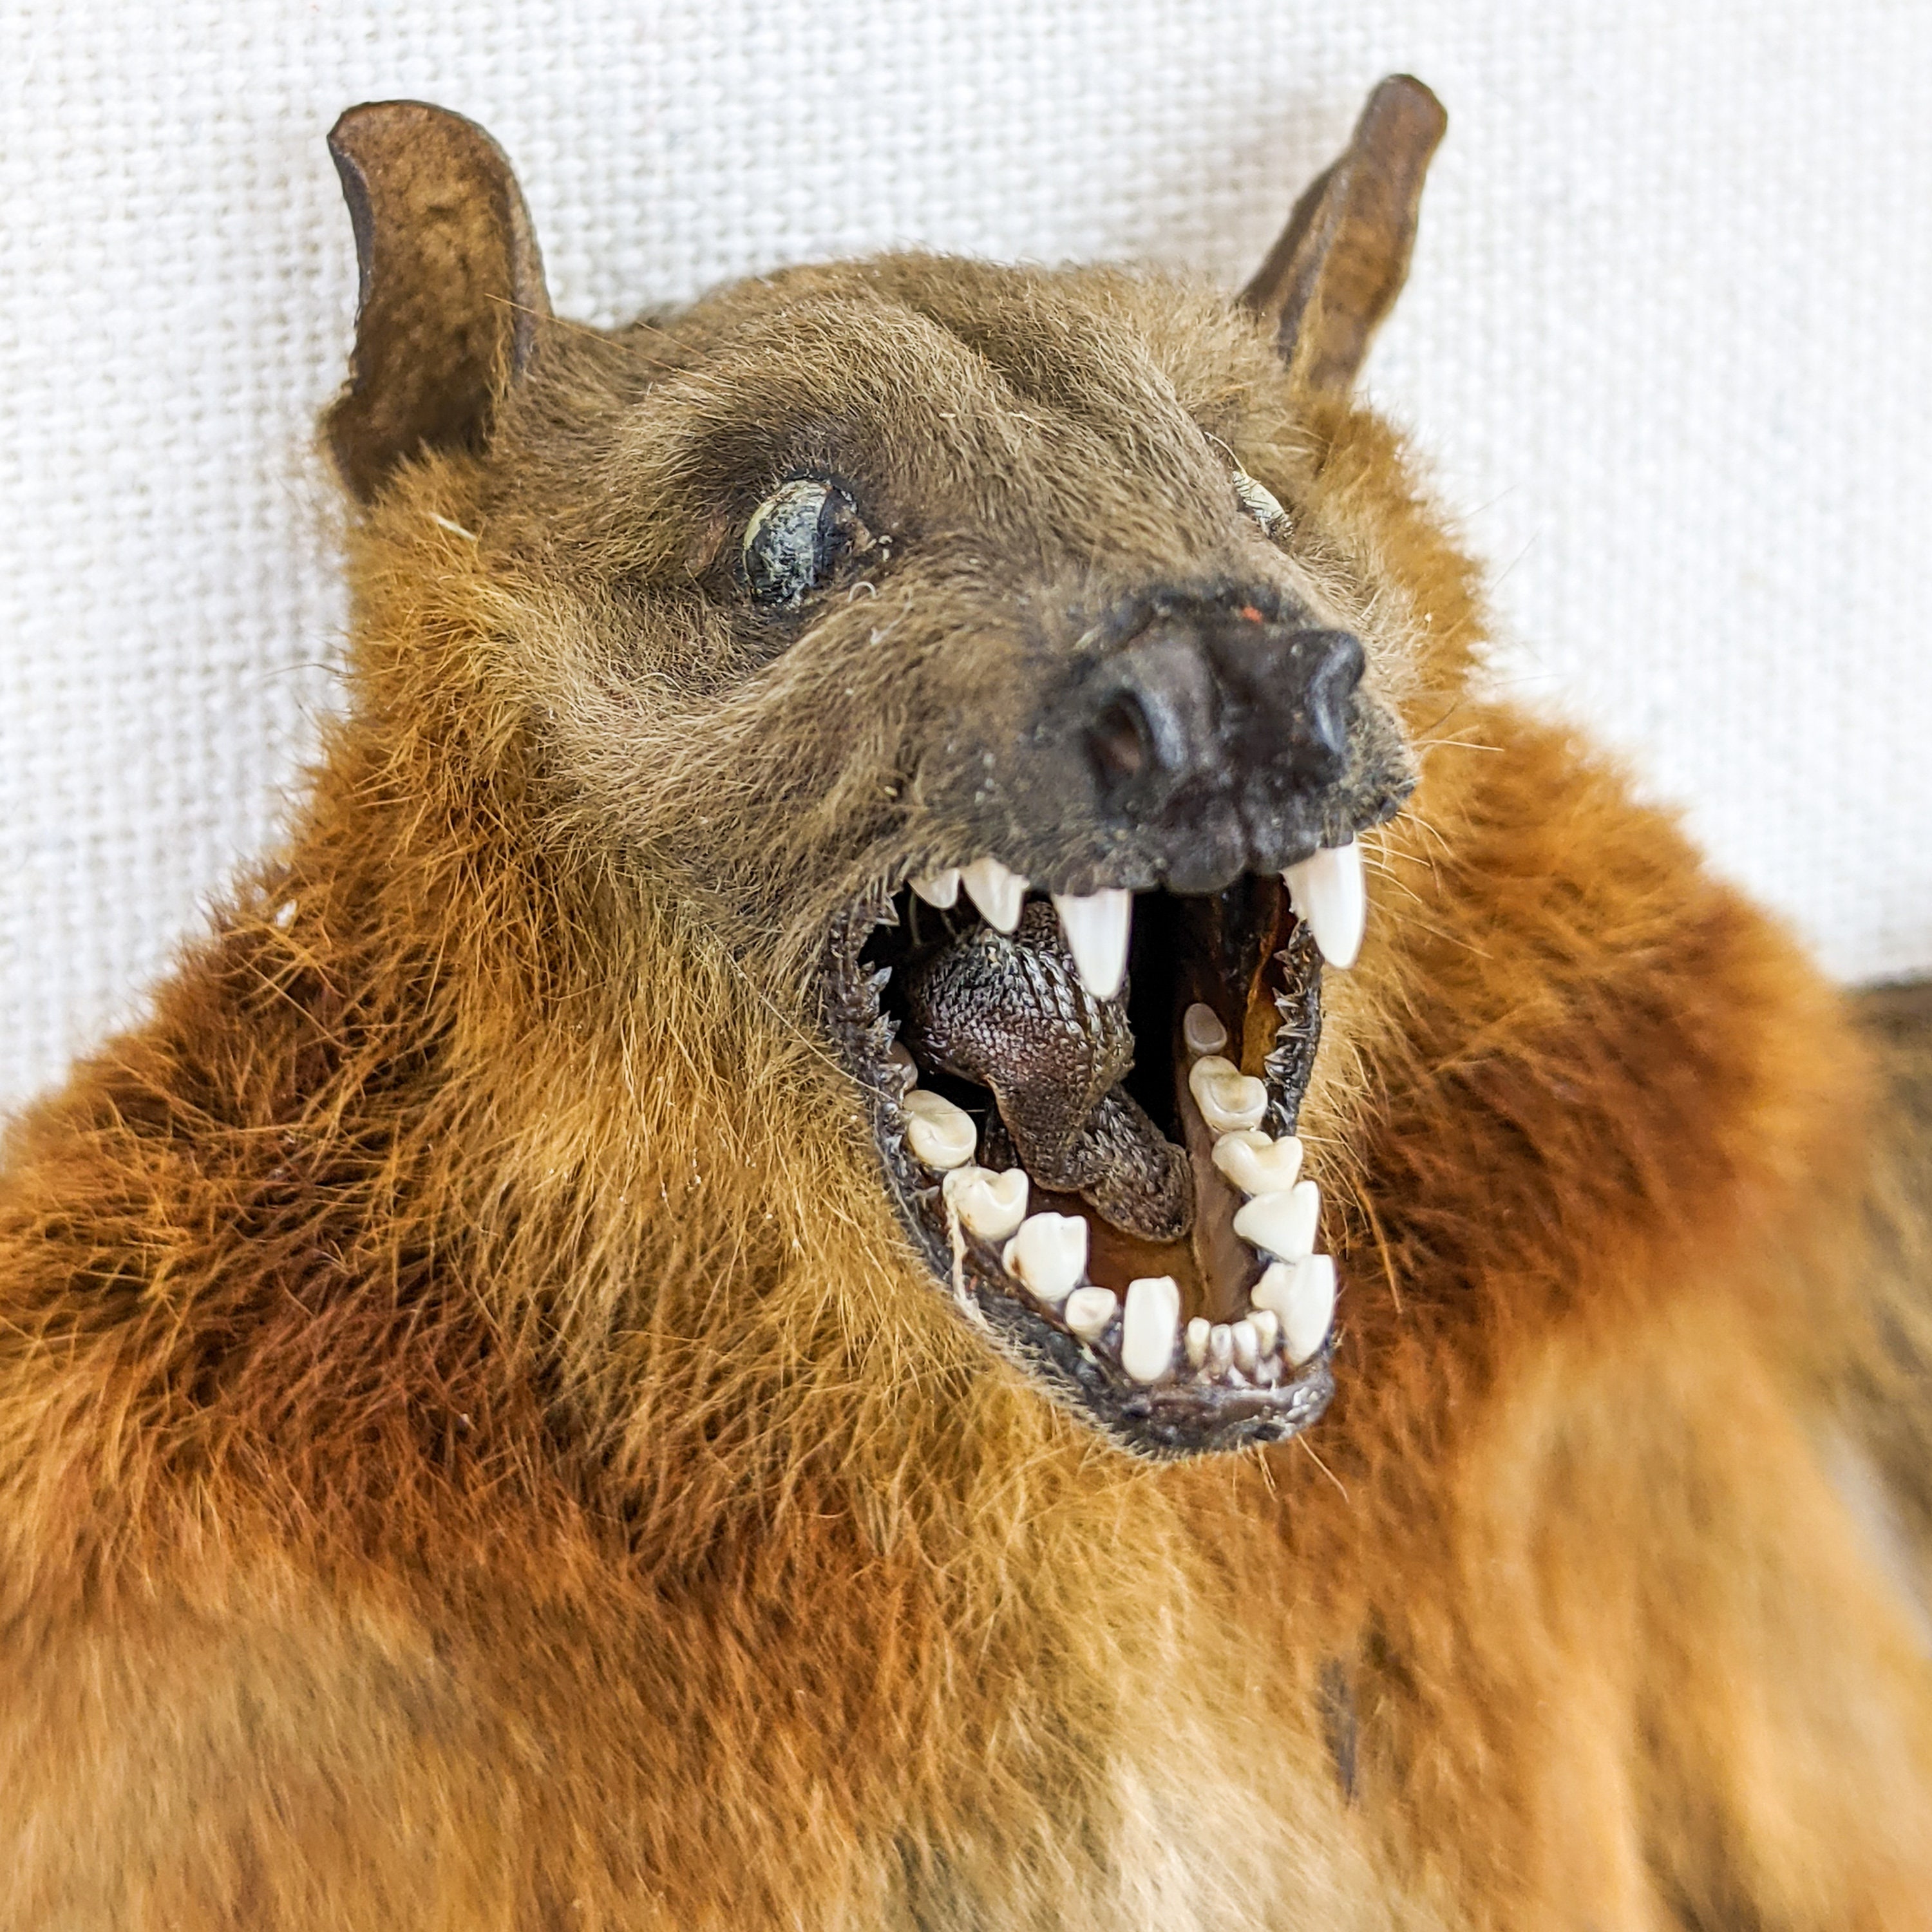 Details about   P13c Taxidermy Oddities Curiosities spread Bat Frame Dsplay collectible C Brach 